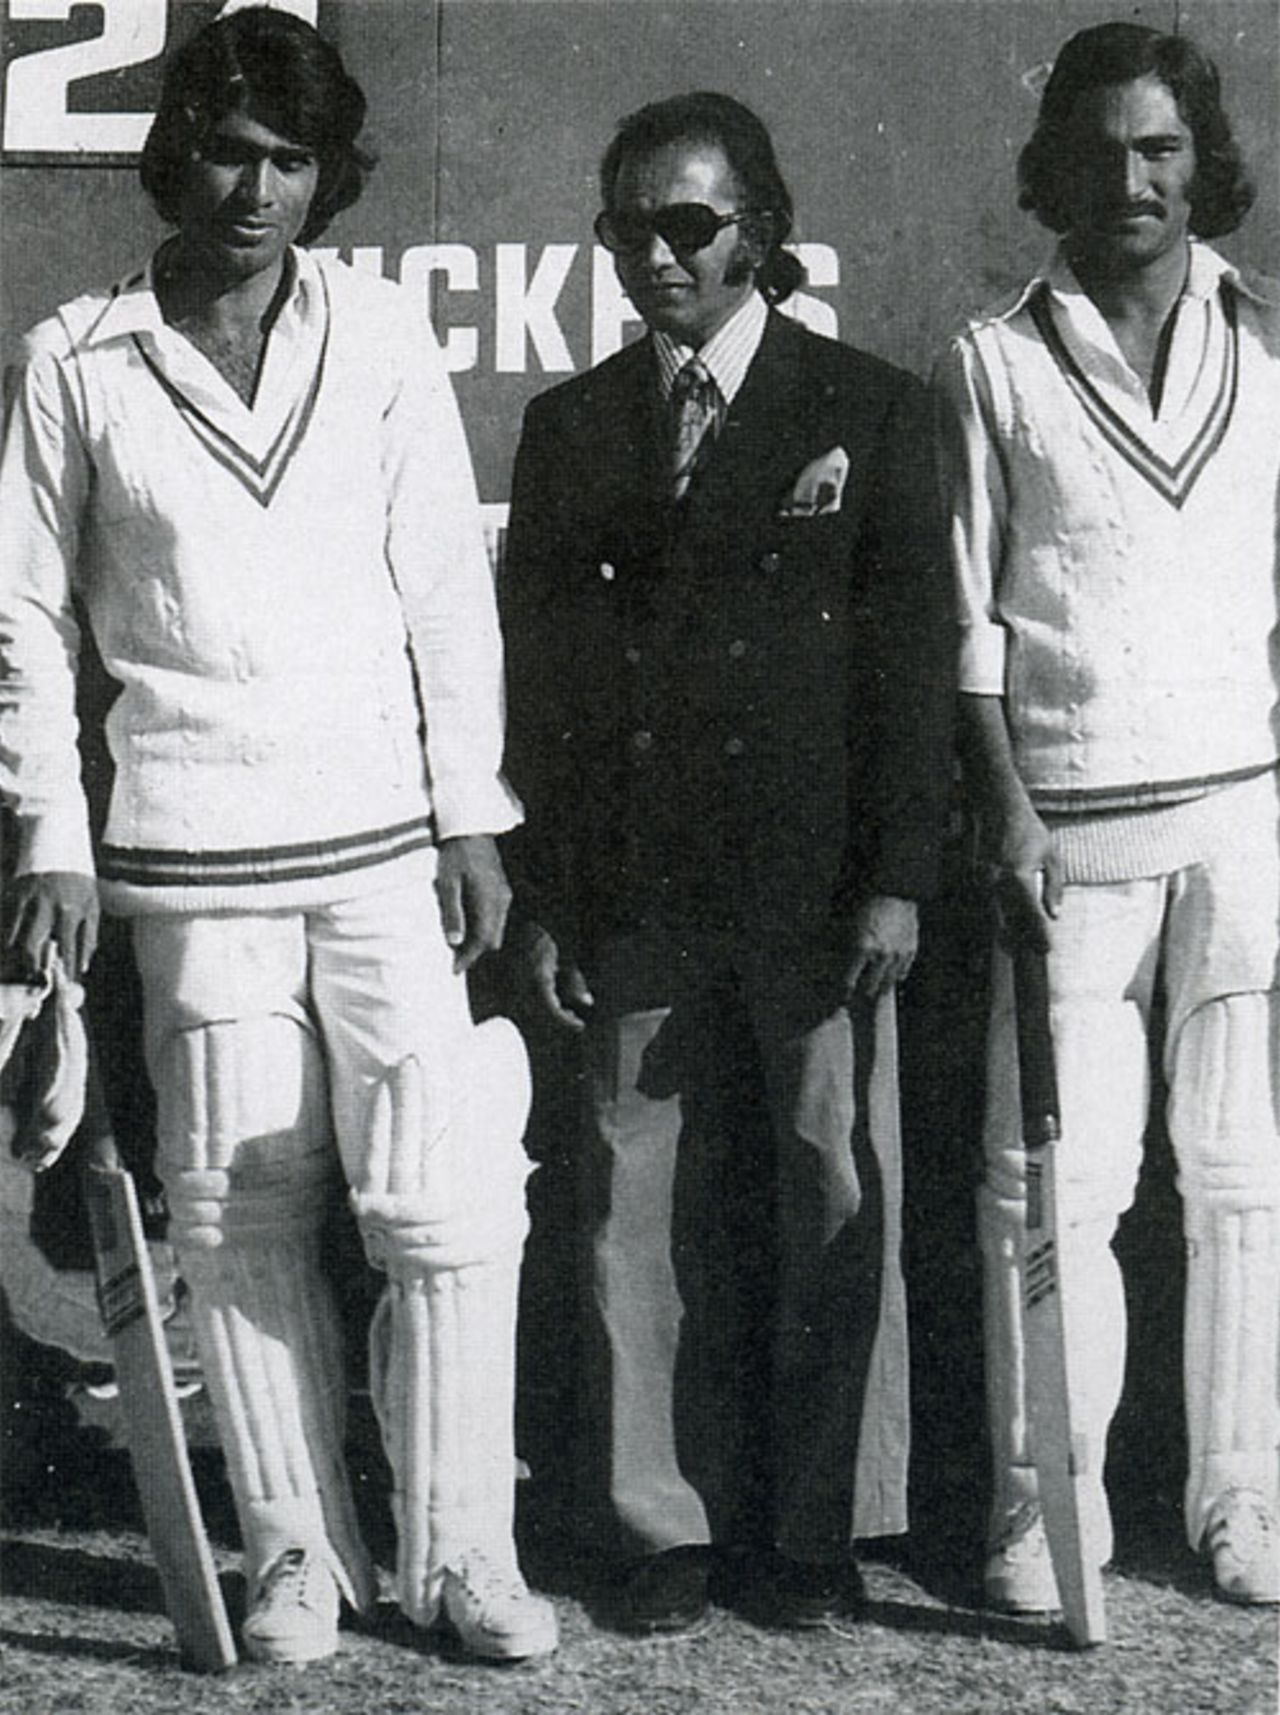 Waheed Mirza (324) and Mansoor Akhtar (224*) pose with Hanif Mohammad after posting a world-record 561 for the first wicket for Karachi Whites against Quetta, February 8, 1977